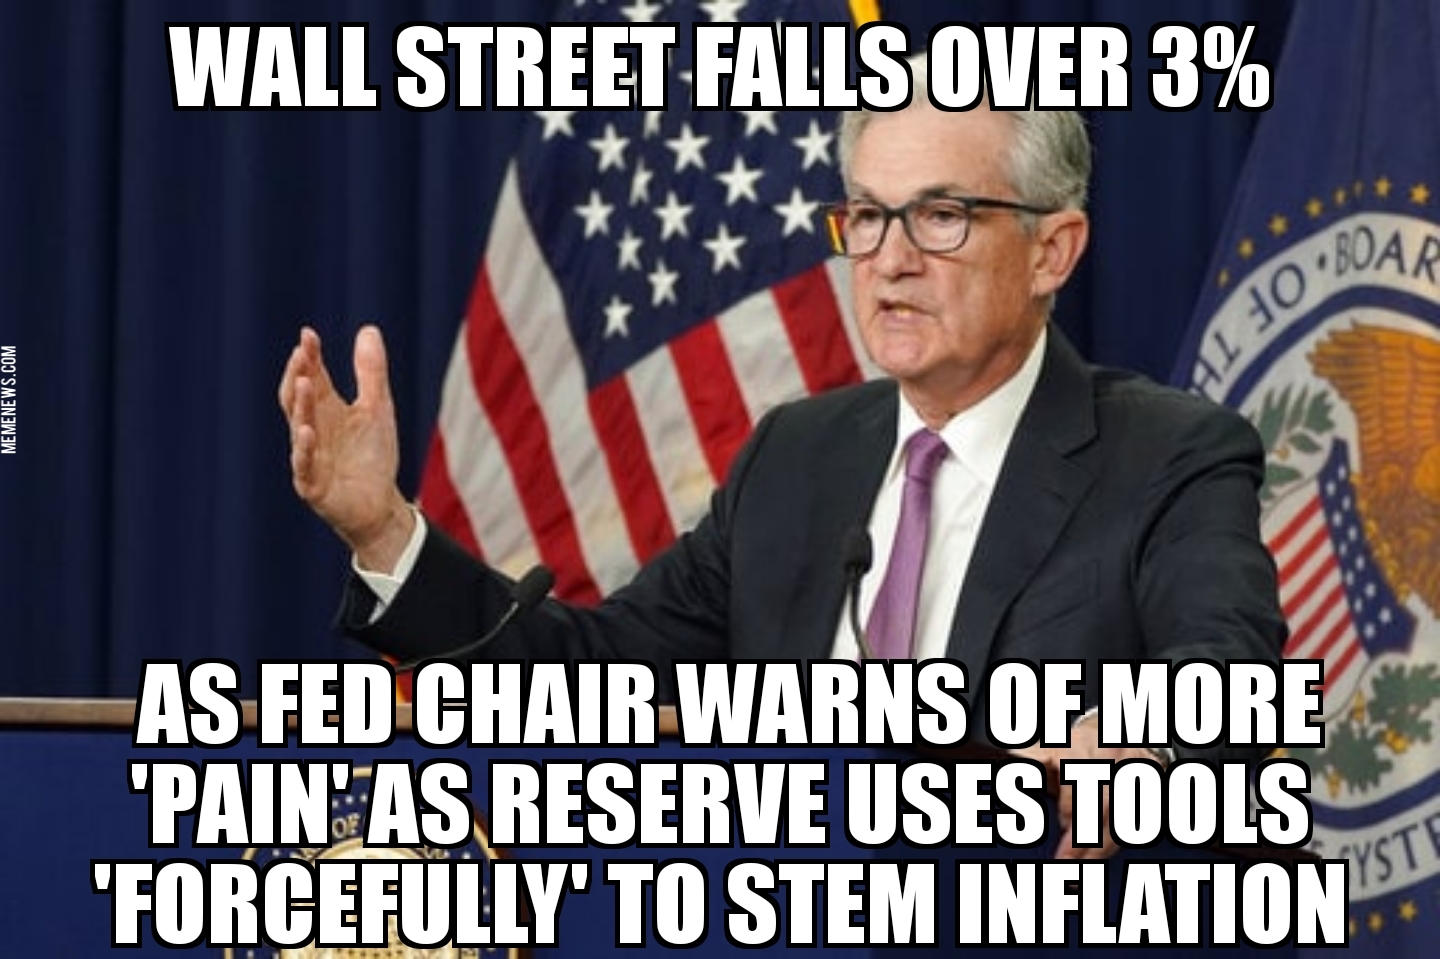 Wall Street falls as fed chair warns of ‘pain’